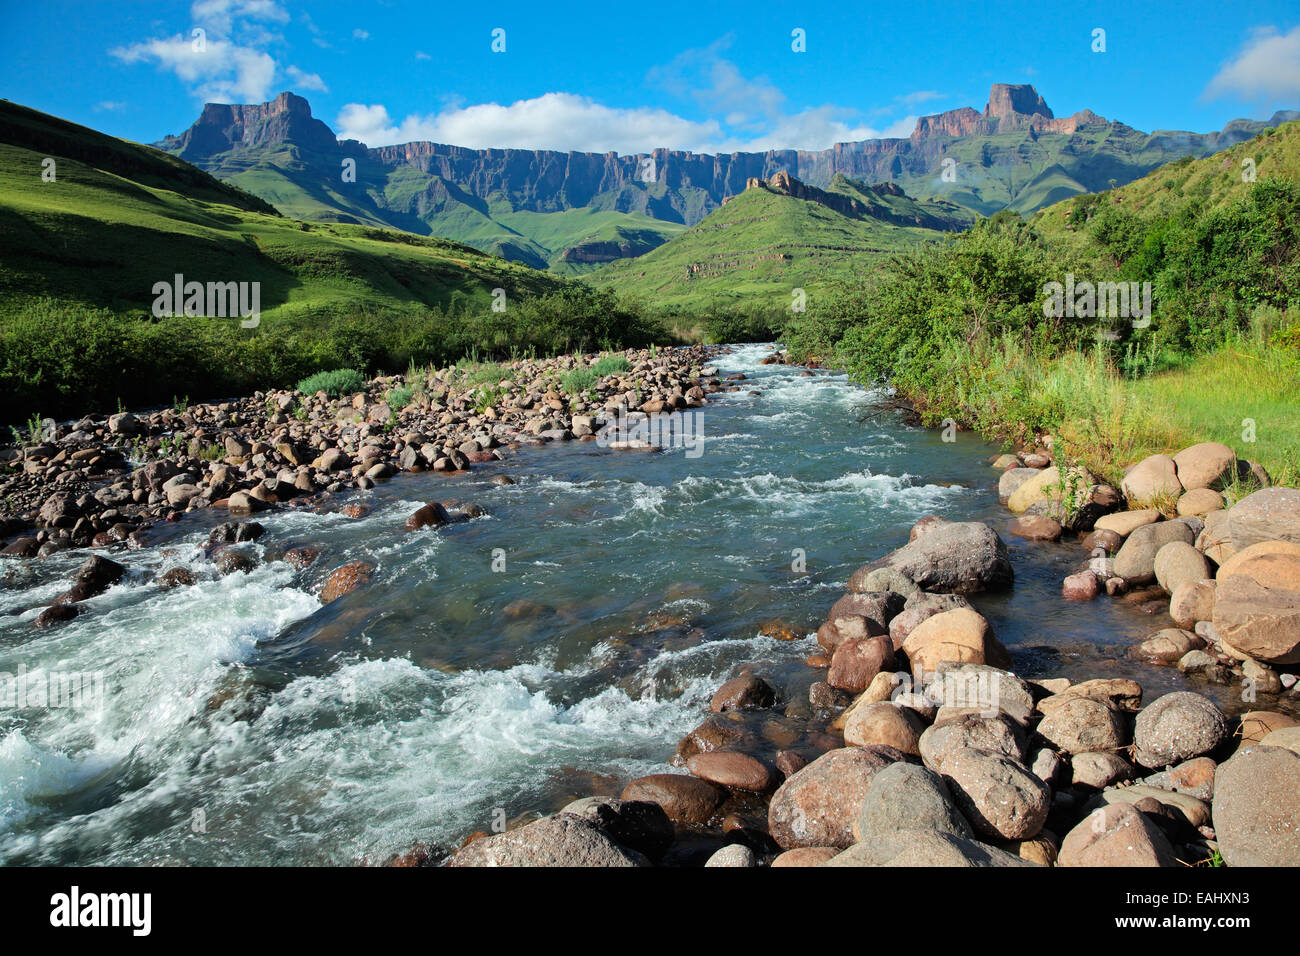 Amphitheater and Tugela river, Drakensberg mountains, Royal Natal National Park, South Africa Stock Photo